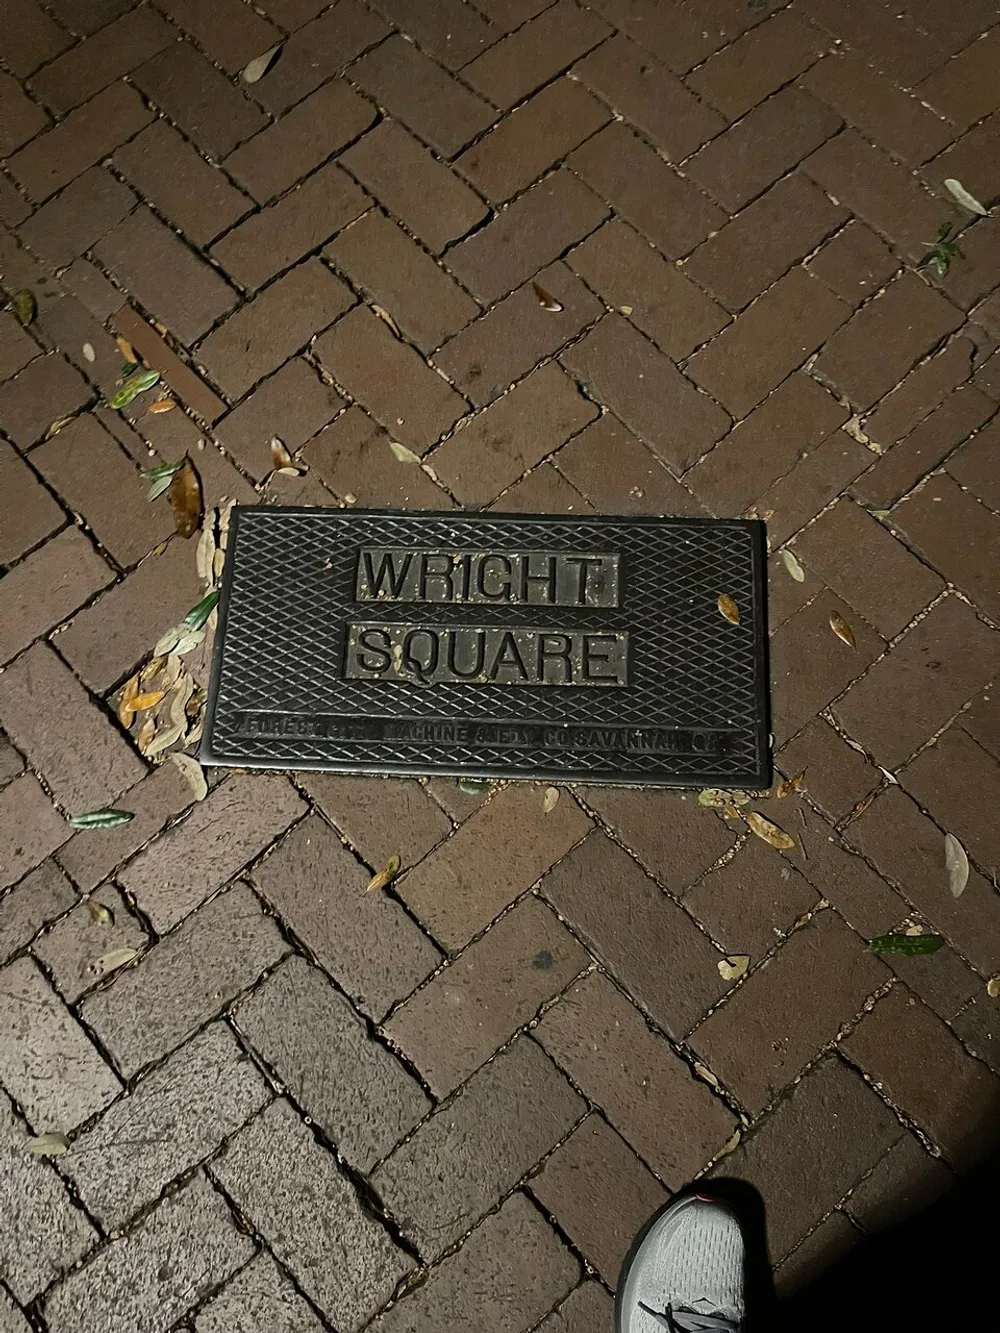 The image shows a plaque on a brick pavement reading WRIGHT SQUARE with some leaves scattered around it and the corner of a persons shoe visible at the bottom